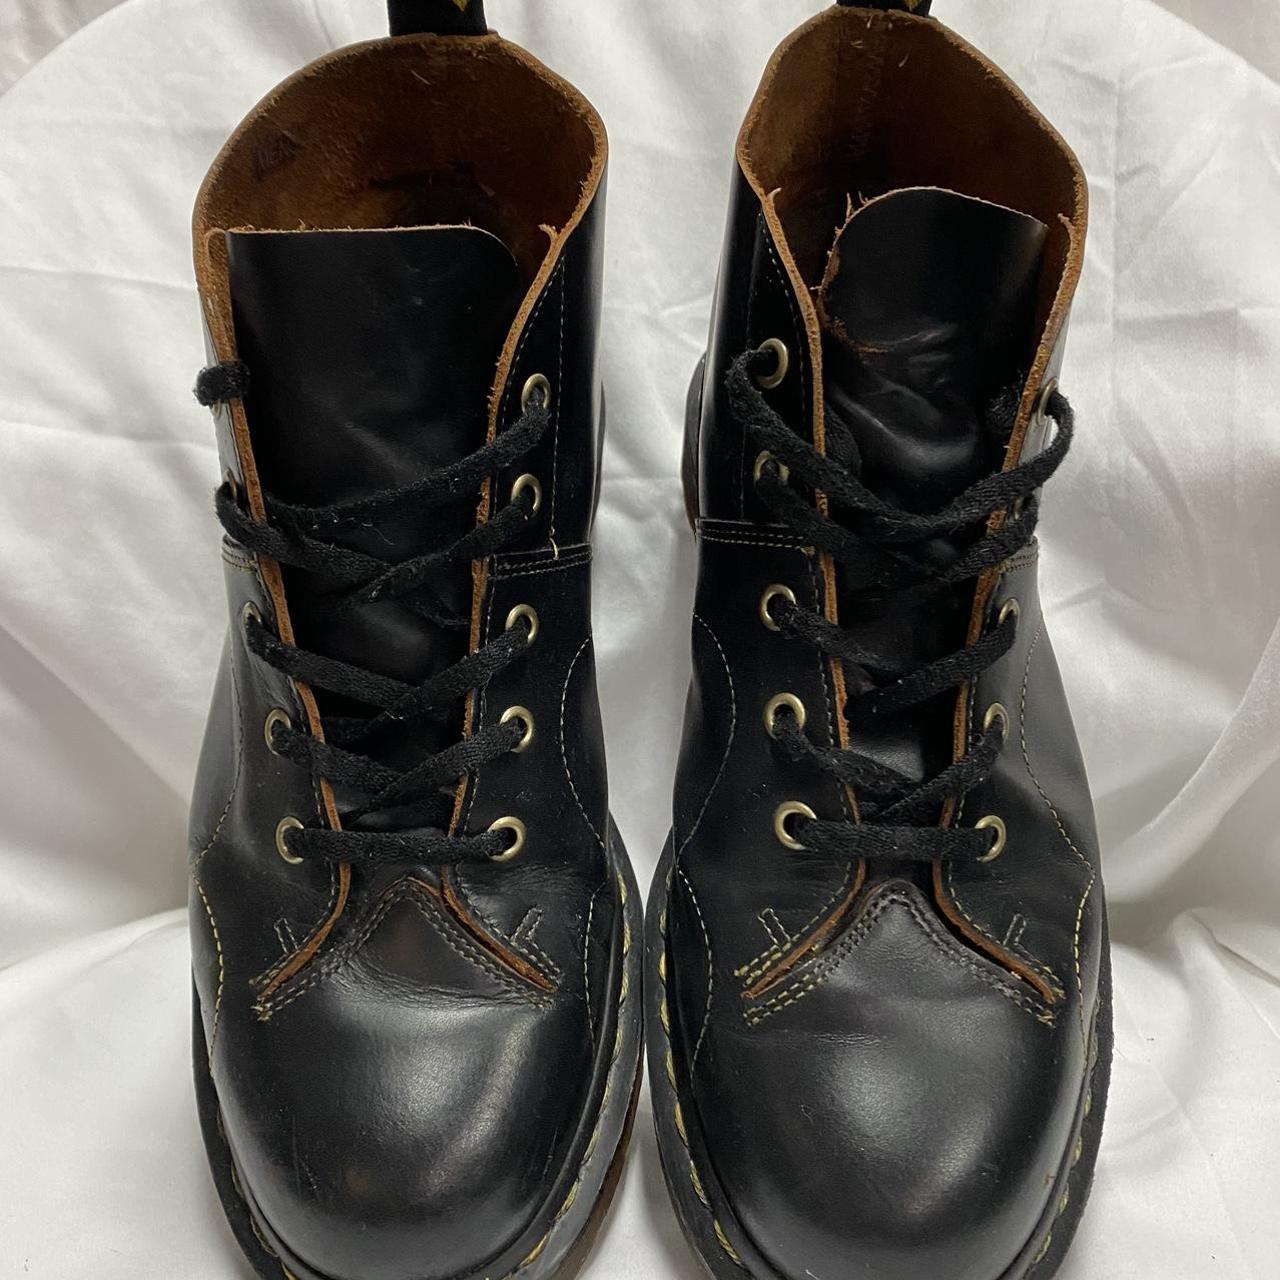 Dr. Martens Boots Mens size 10. Great style and... - Depop